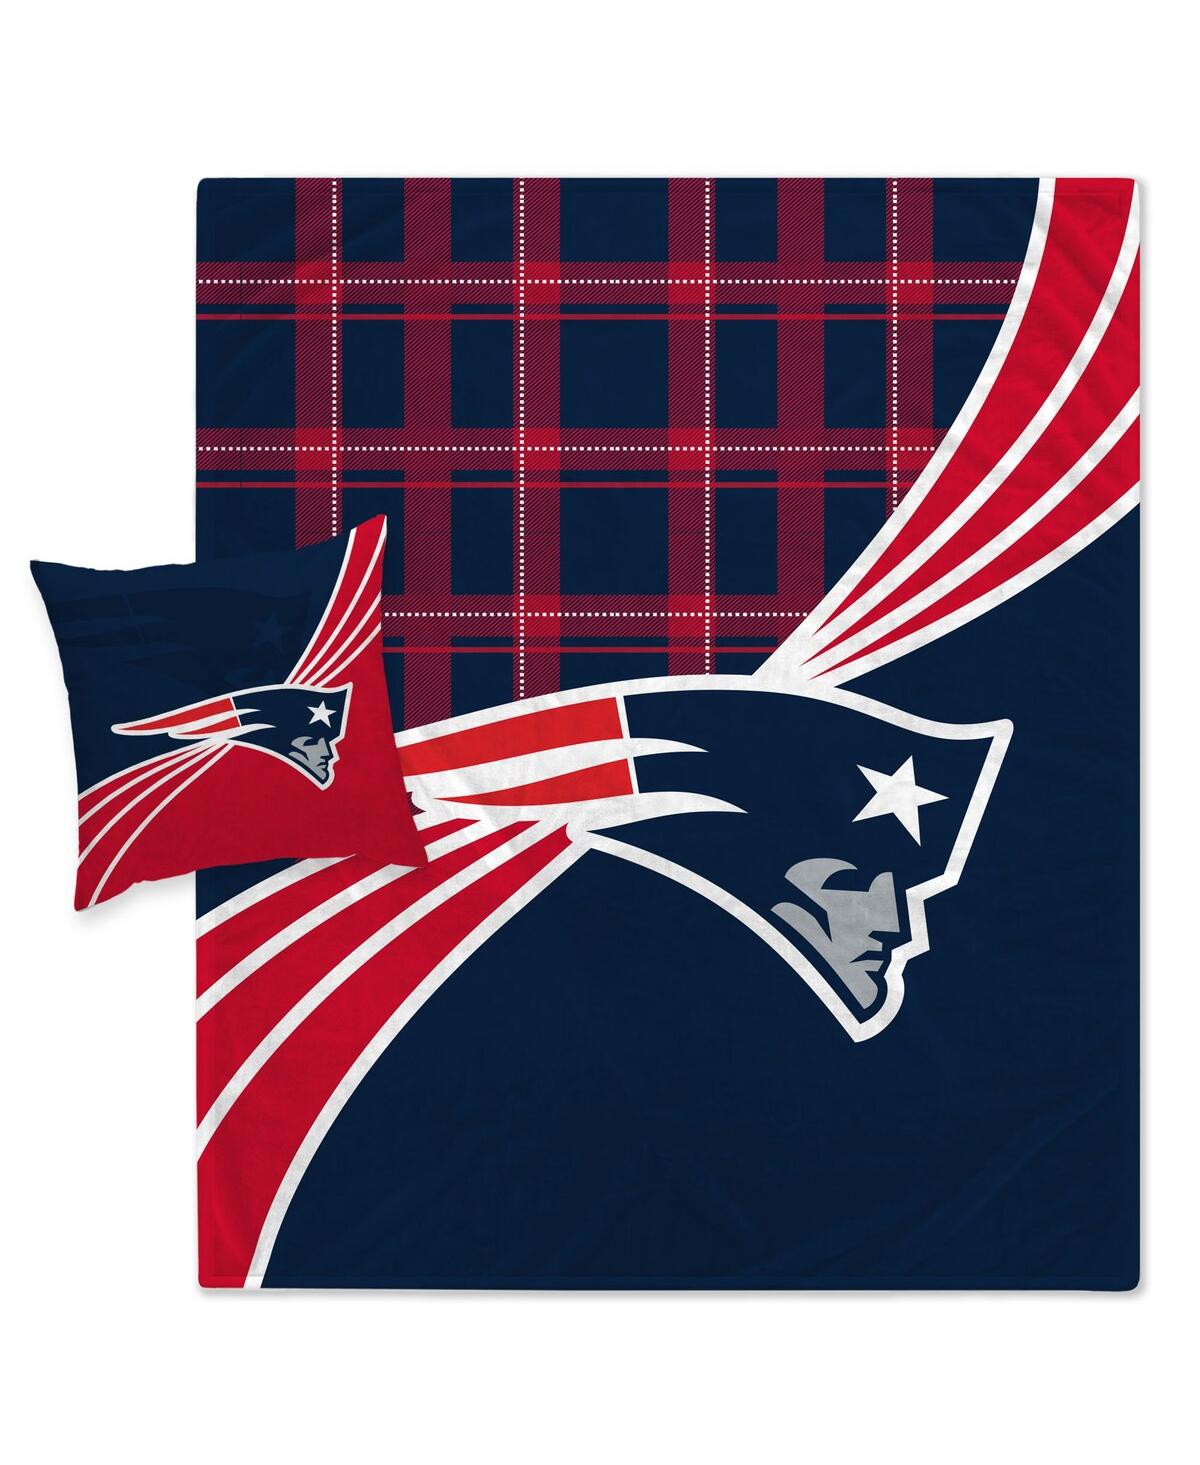 Pegasus Home Fashions New England Patriots Plaid Wave Flannel Fleece Blanket And Pillow Combo Set In Navy